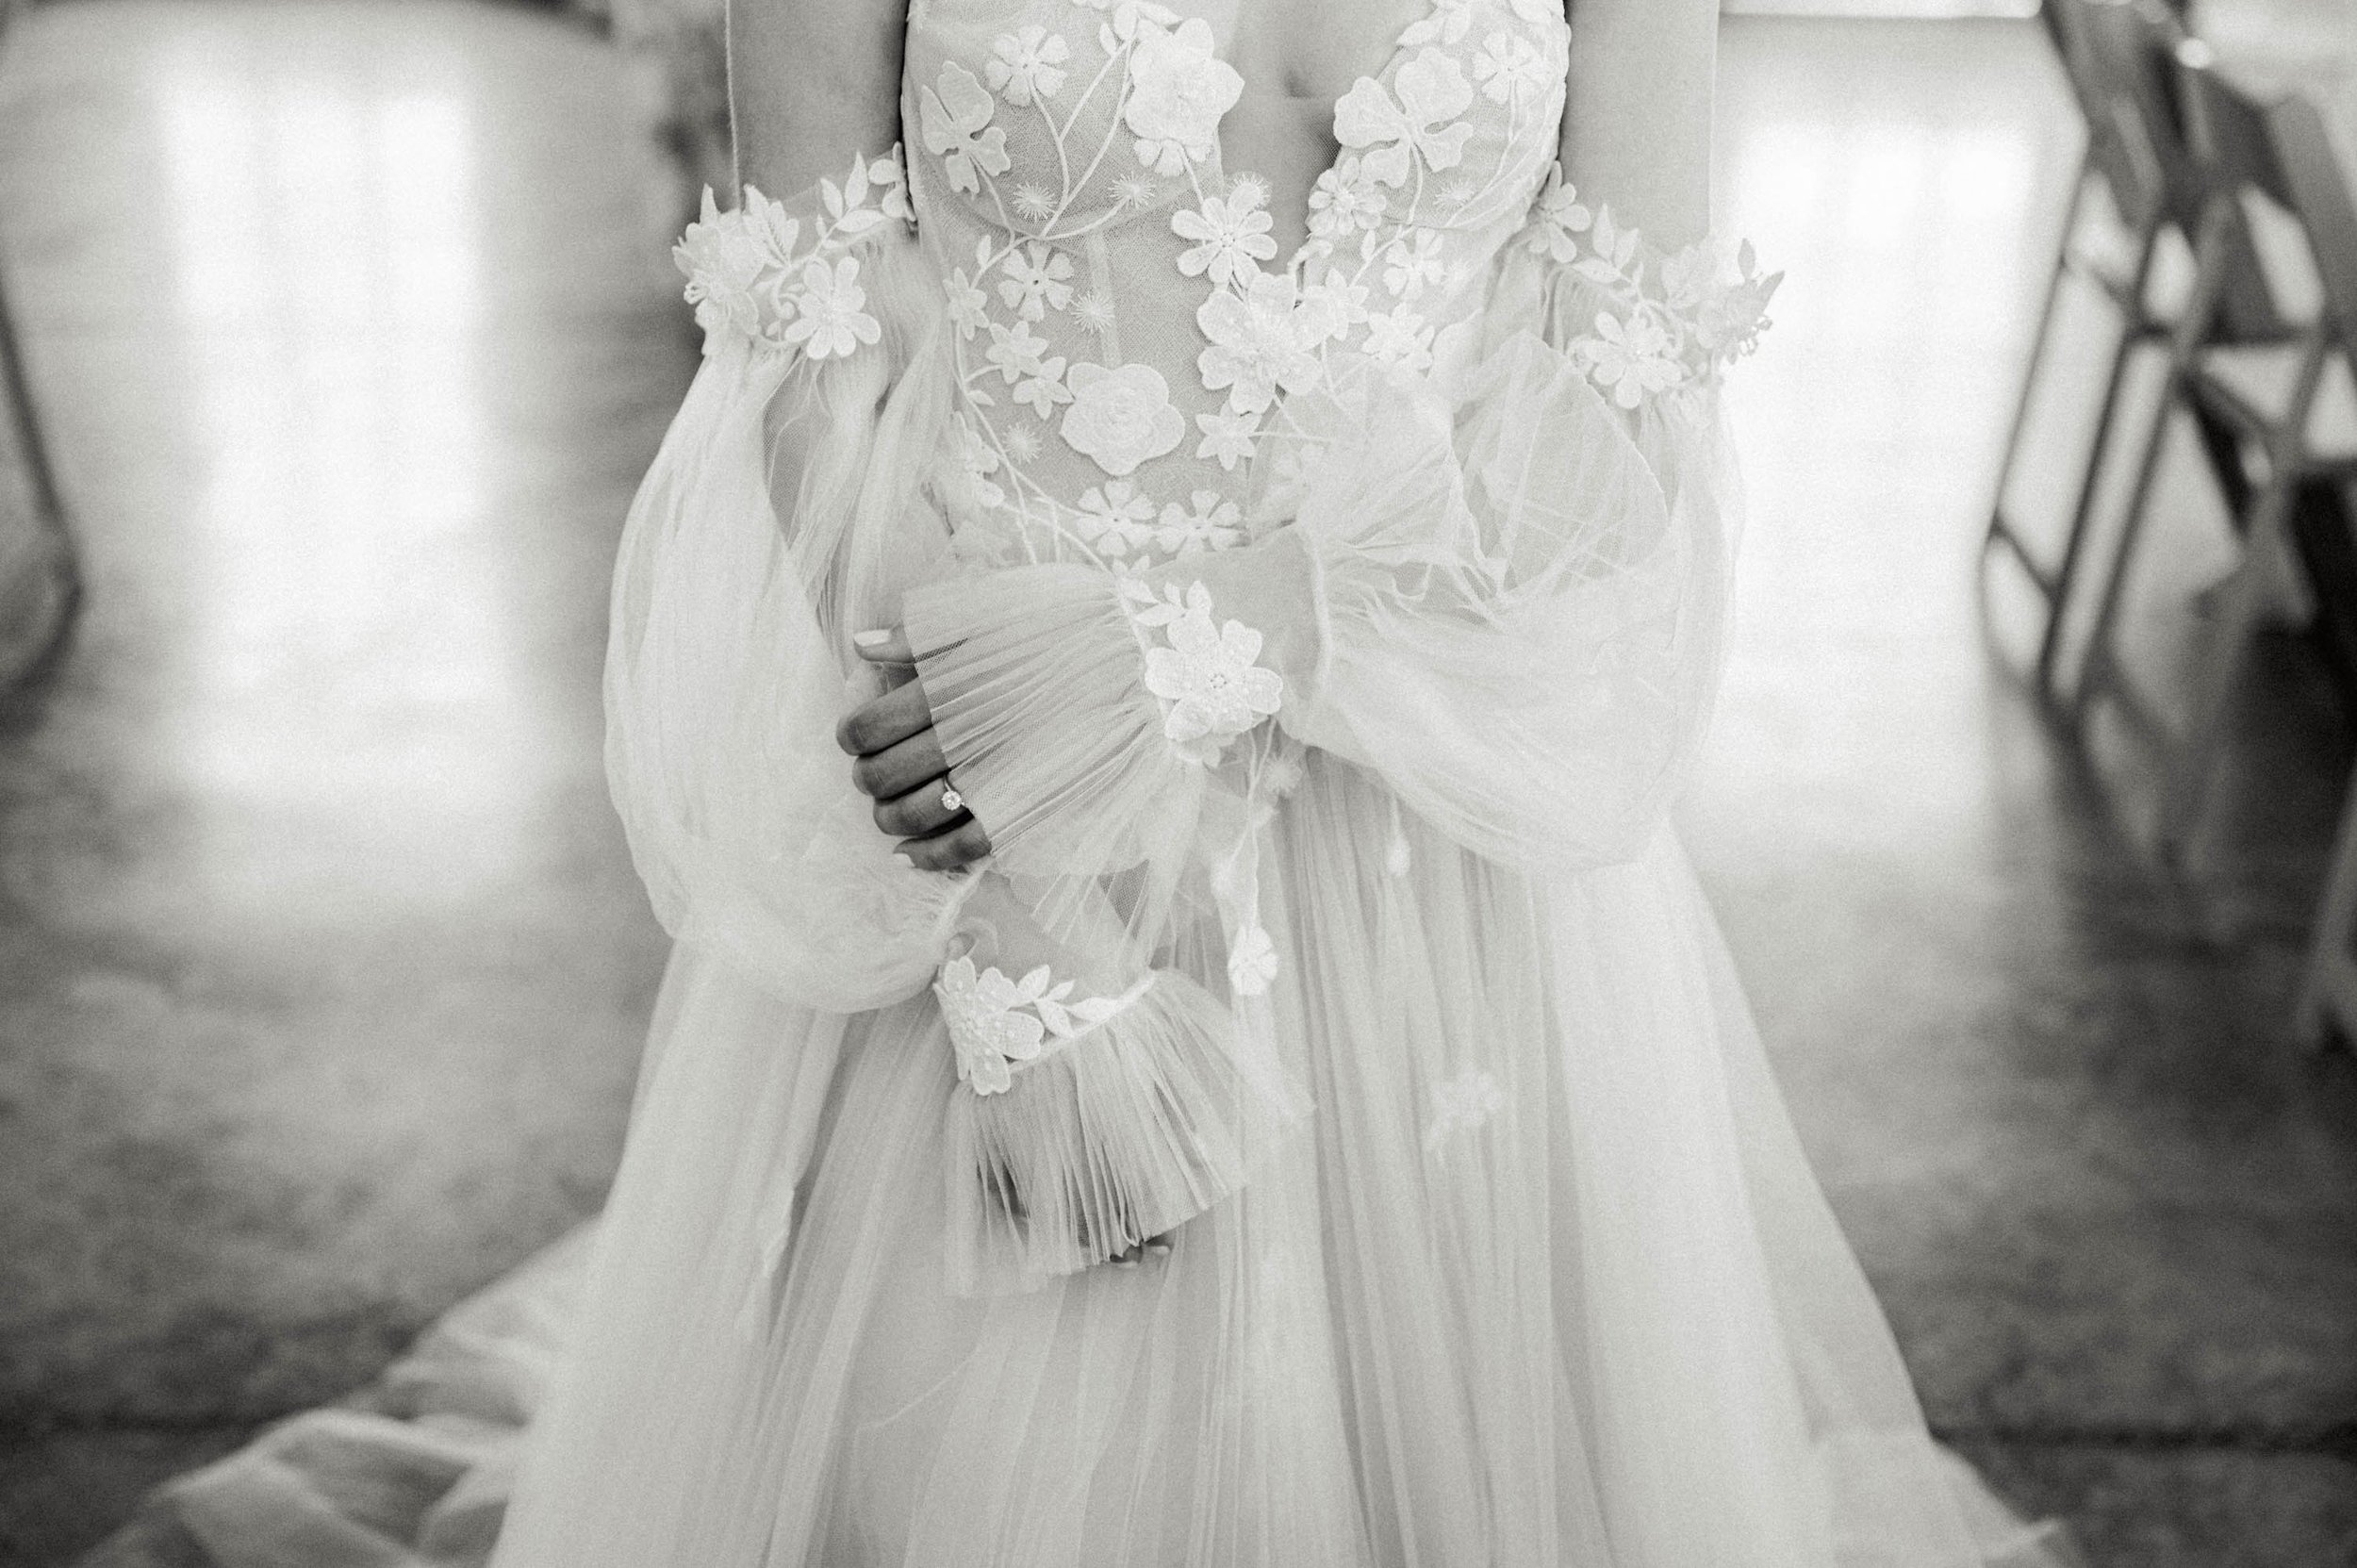  A black and white photograph of a bride in Chic Nostalgia Ayla wedding dress, which is a bustier bodice with a sheer deep v covered in large floral 3D lace. The wedding dress has a full tulle skirt and an off the shoulder puff tulle sleeves with ruf